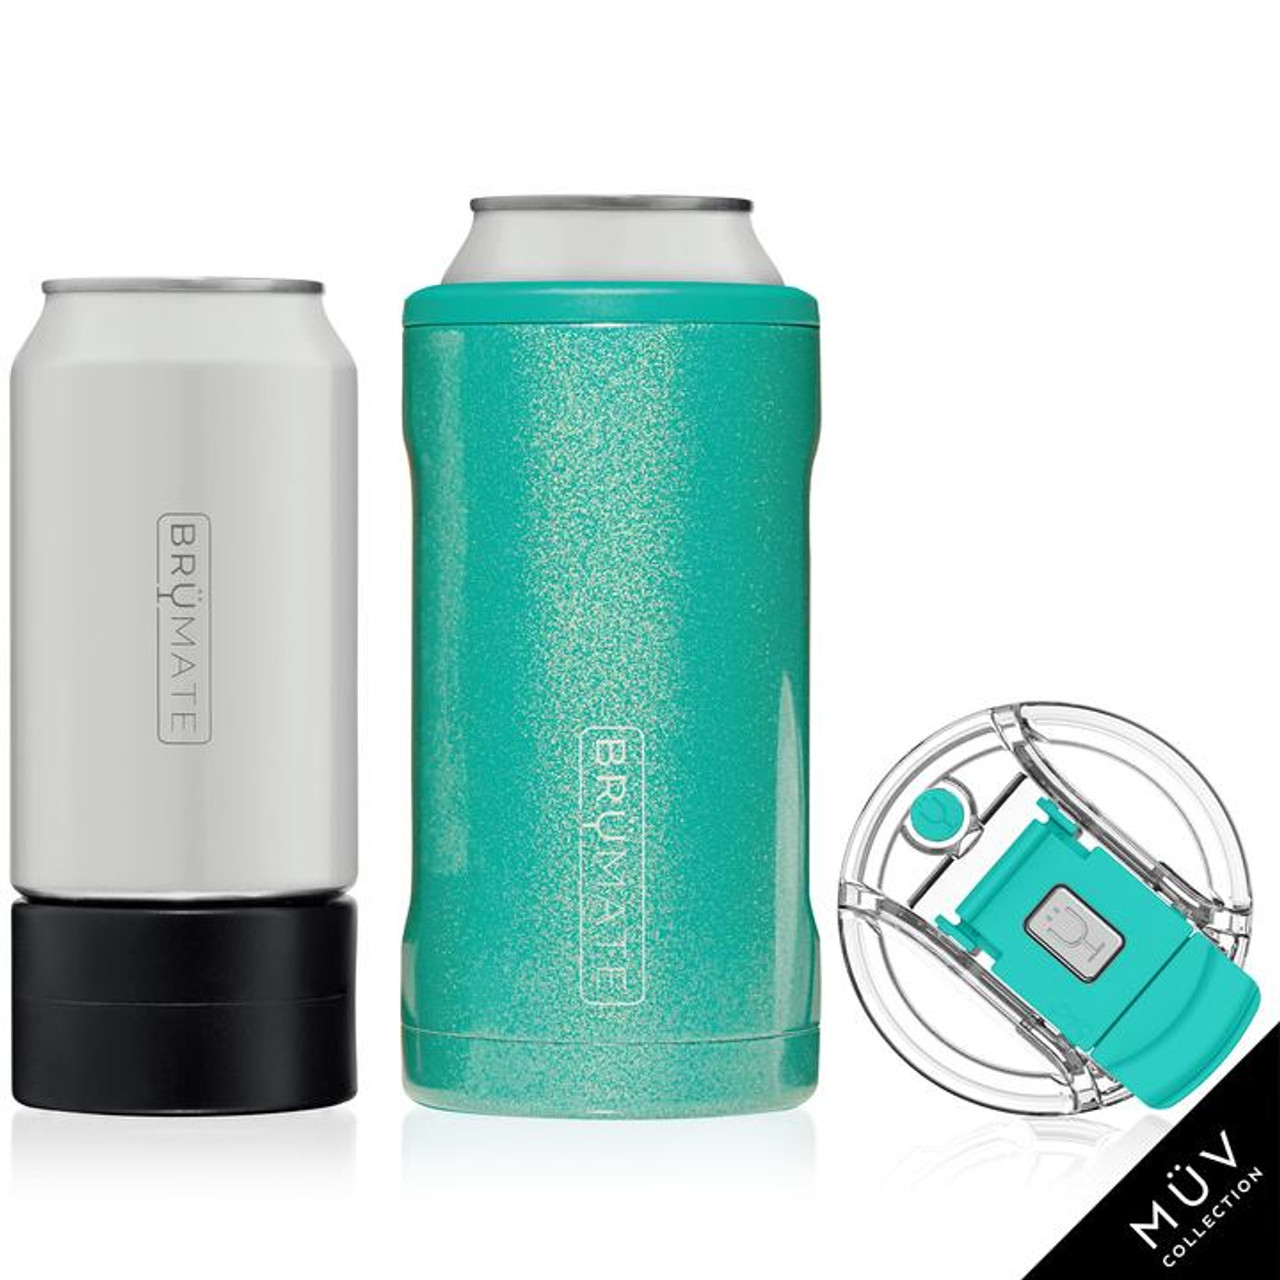 Insulated Beer-Holding Containers : BruMate 'Hopsulator